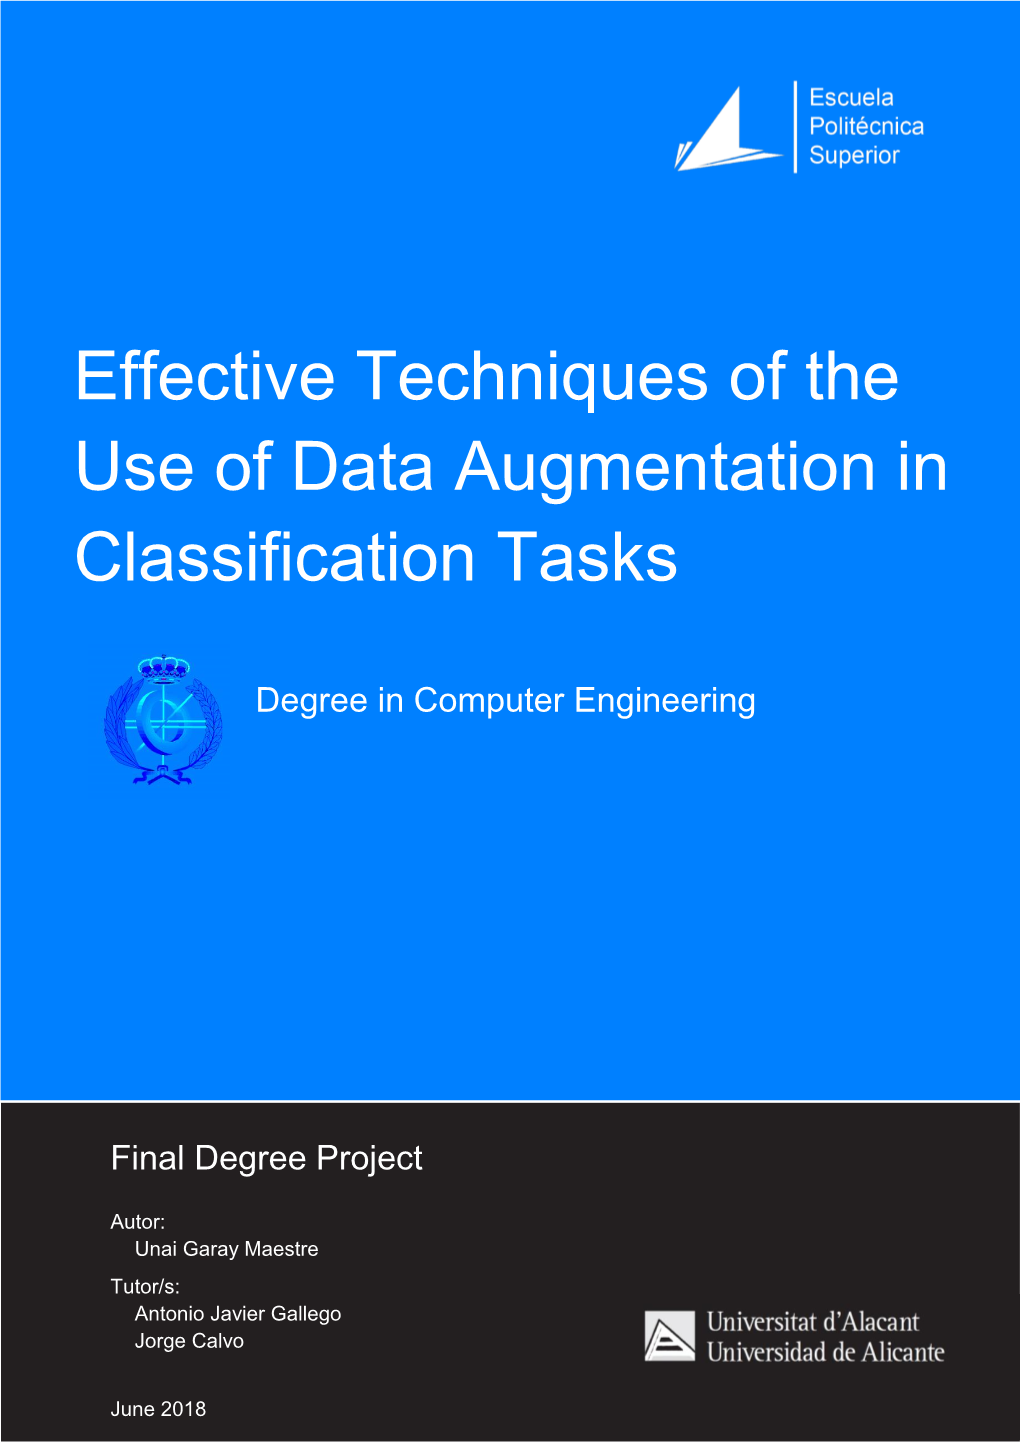 Effective Techniques of the Use of Data Augmentation in Classification